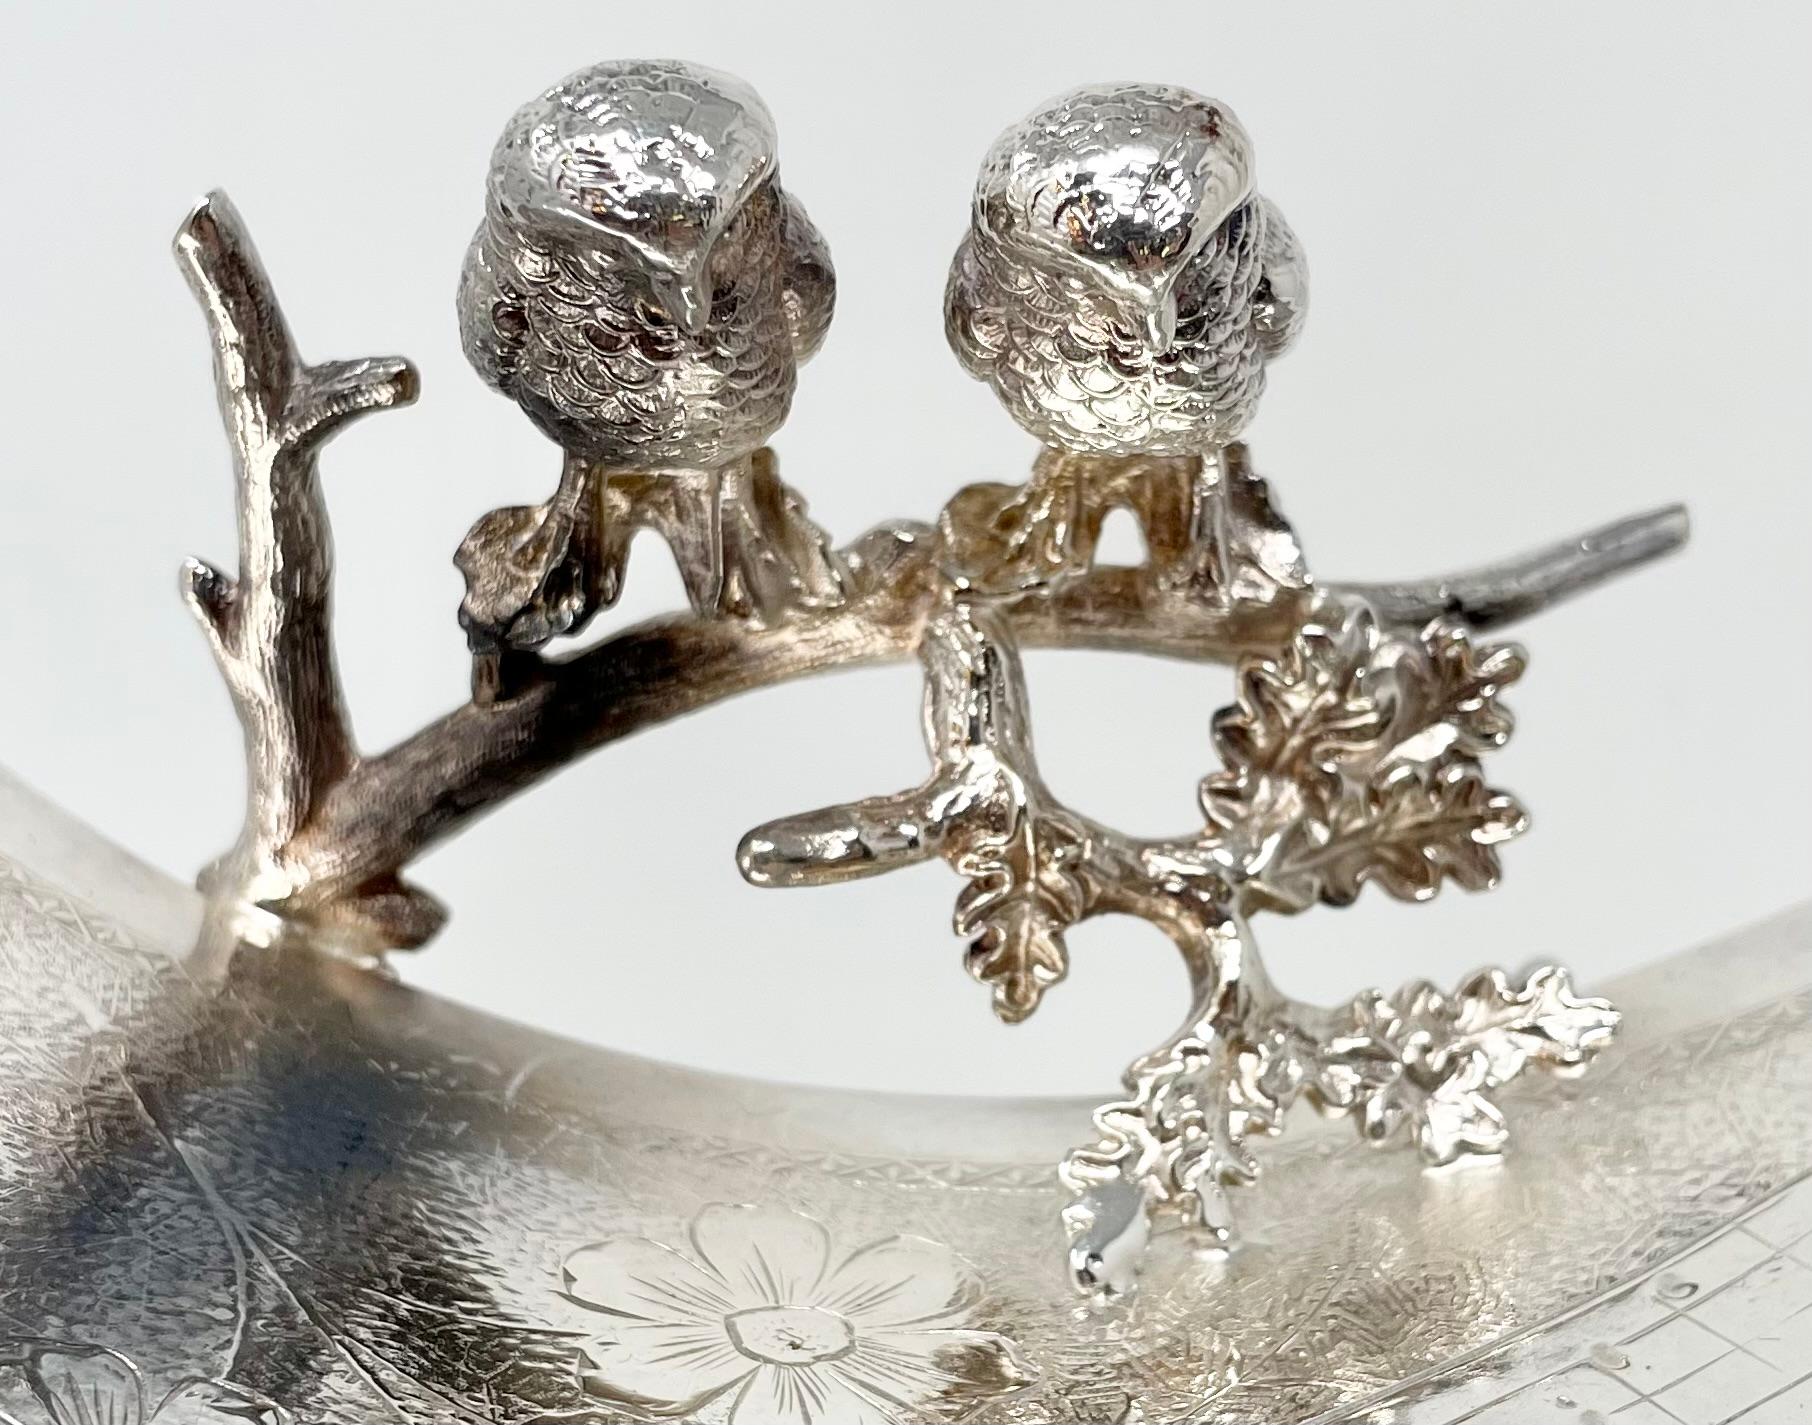 19th Century Antique American Silver-Plated 